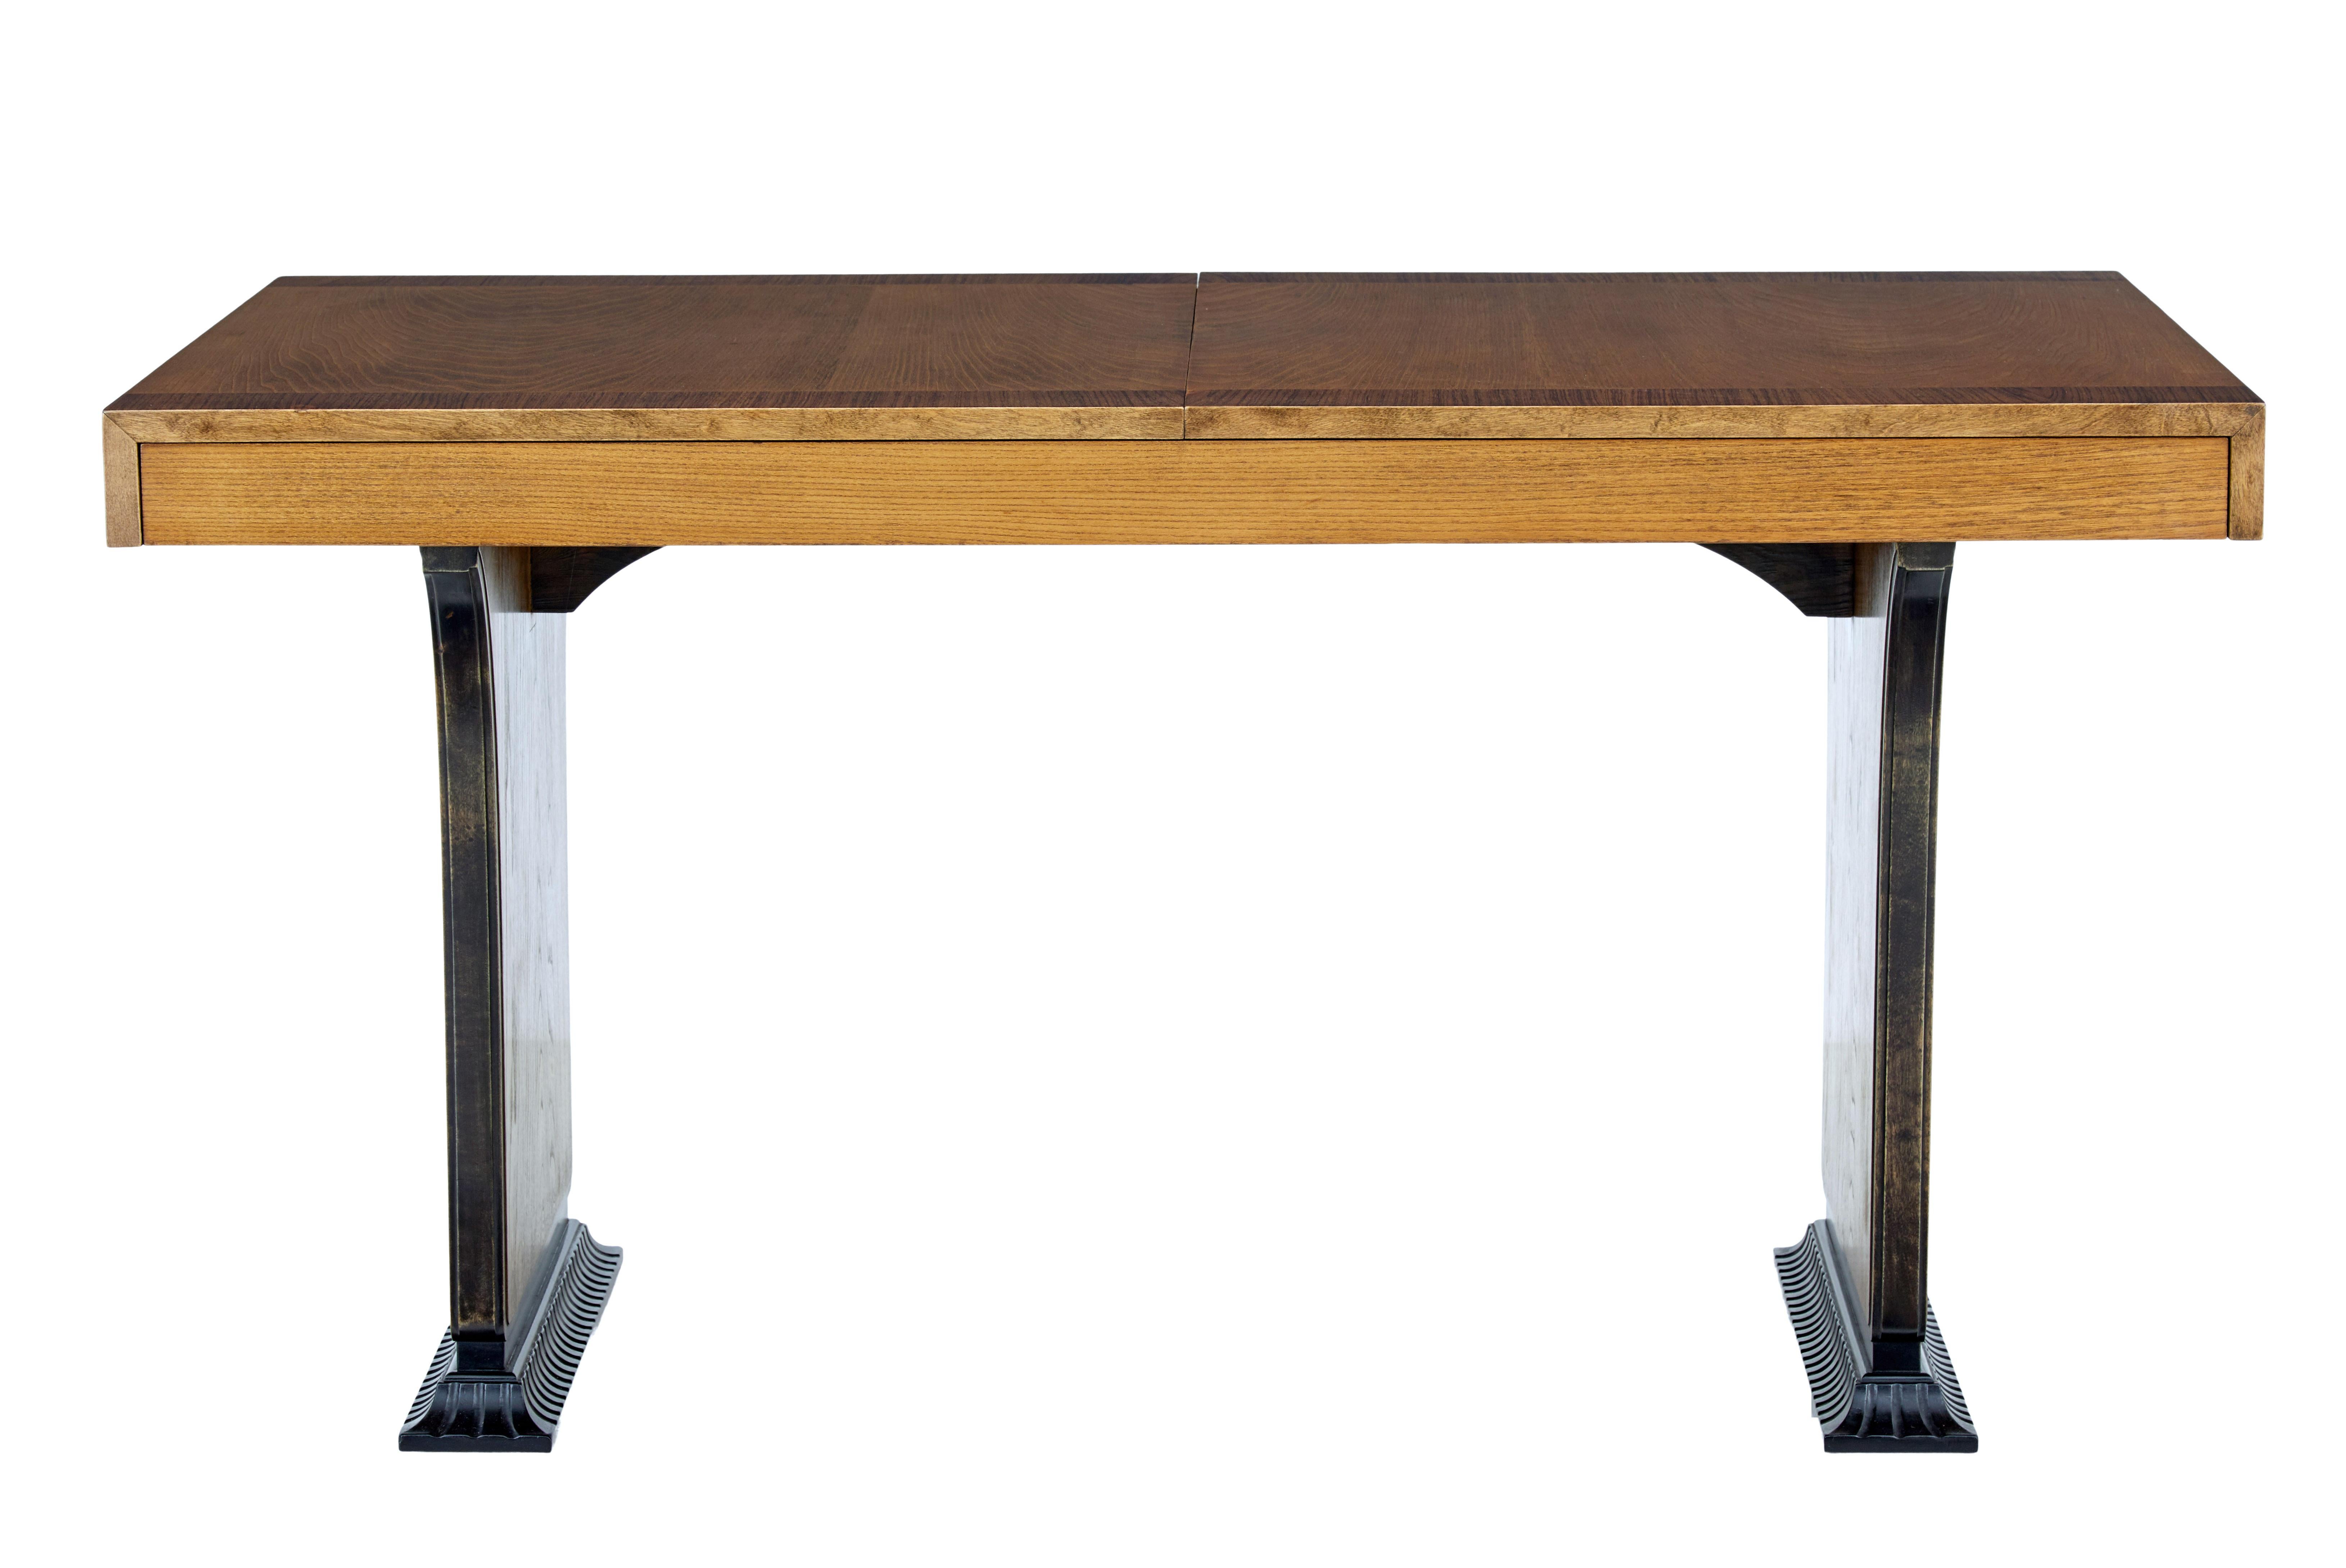 Beautiful inlaid table by Swedish designer Erik Chambert circa 1930.

Formerly an extending dining table, without the leaves this table is perfect for a desk.

Rectangular elm top with rosewood crossbanded edge. Standing on a pair of shaped